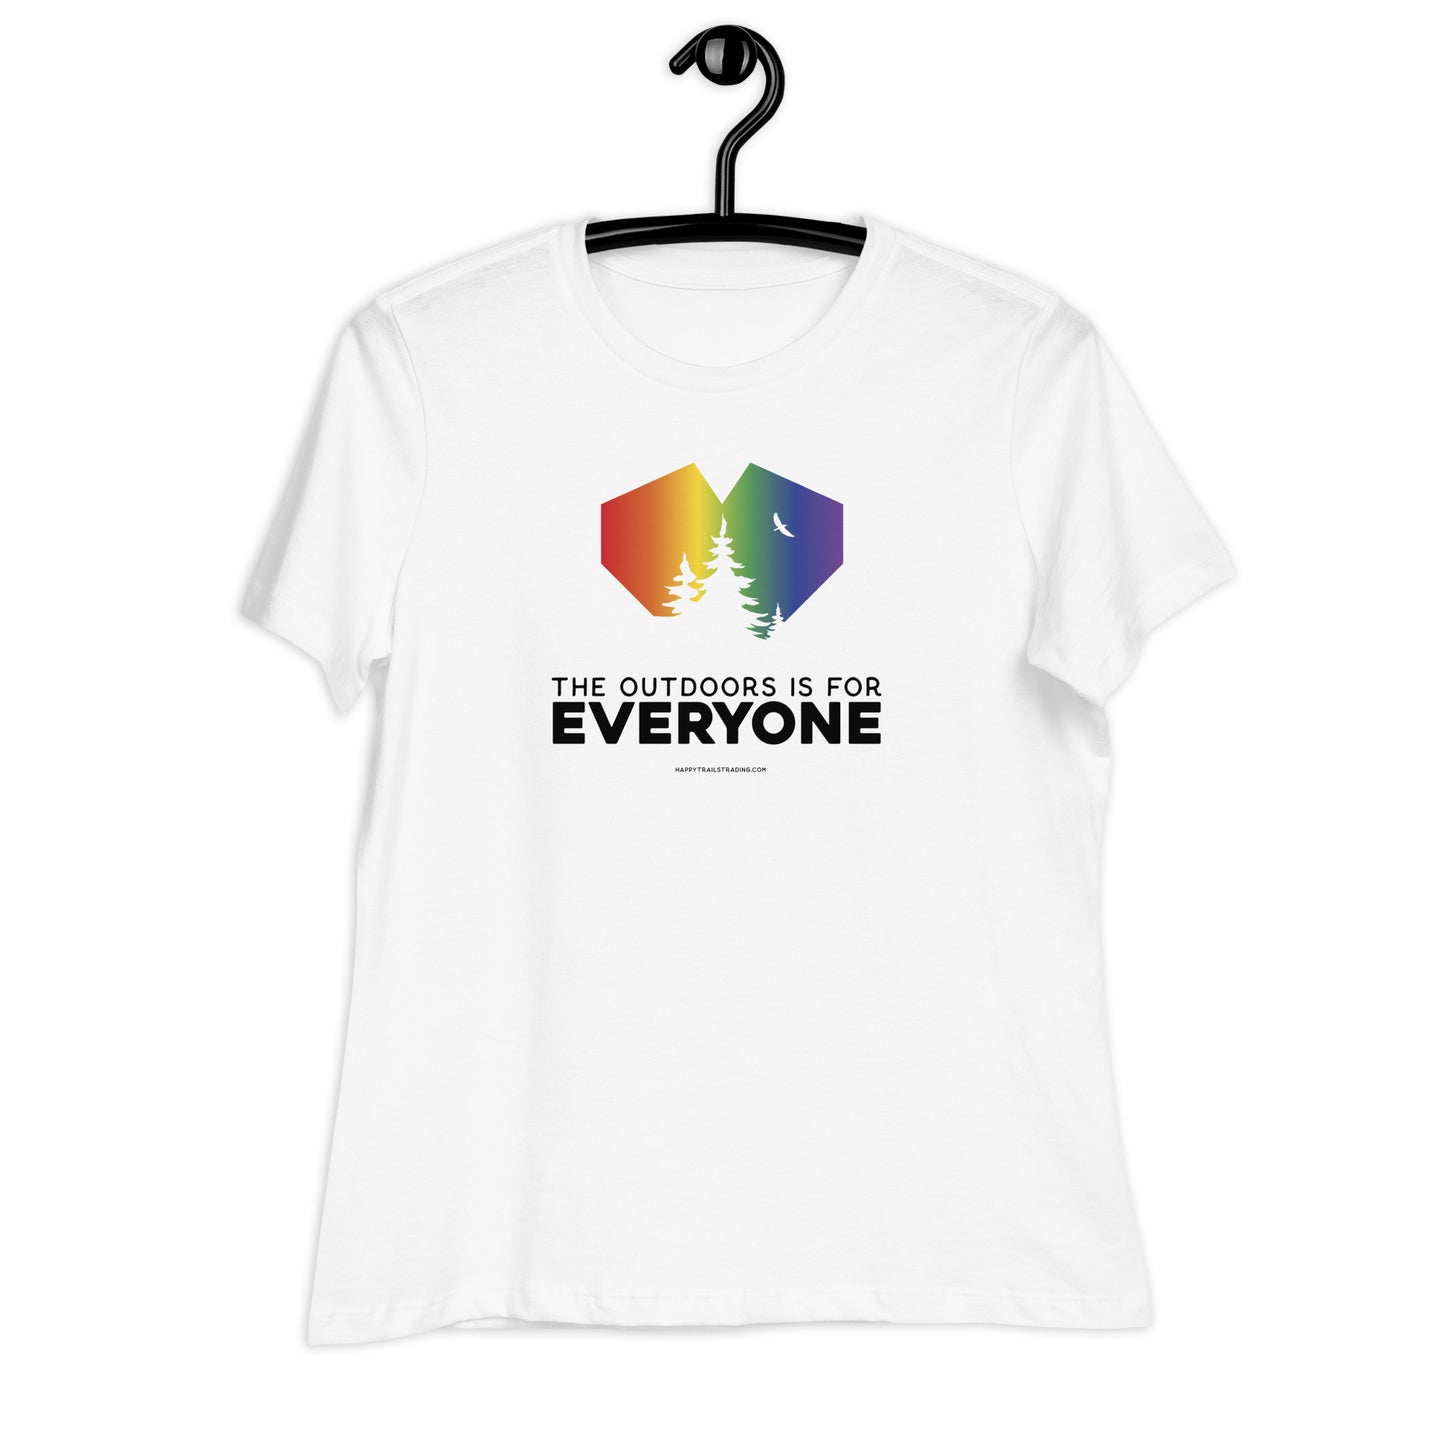 The Outdoors Is For EVERYONE - Women's Relaxed T-Shirt